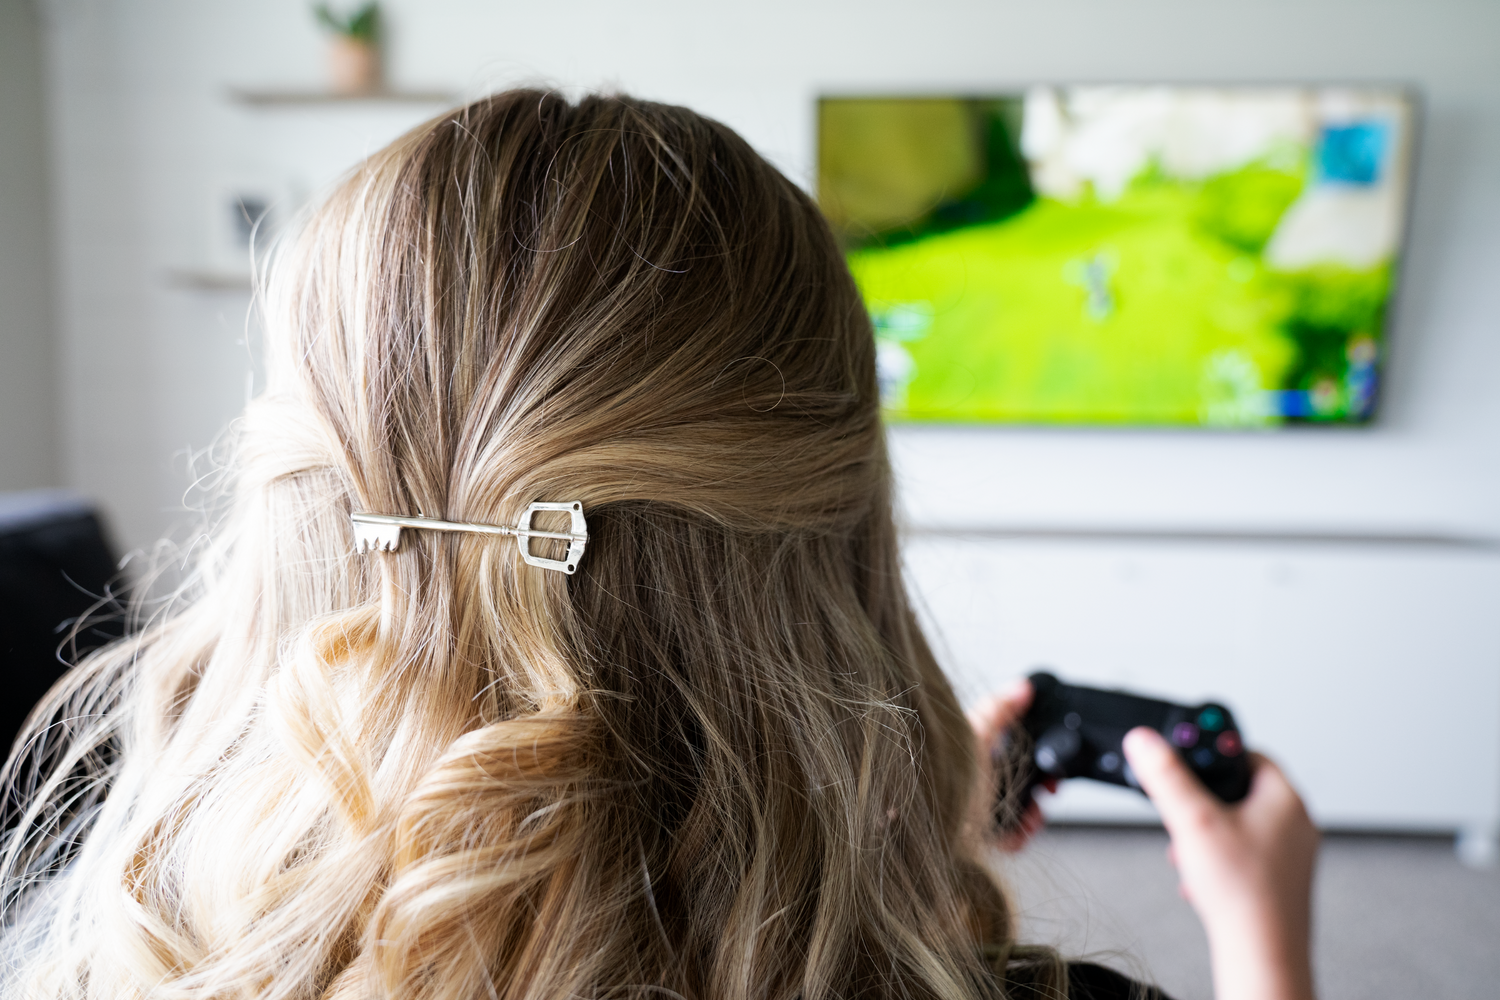 A silver hair clip on brown hair of a woman playing a Playstation 4